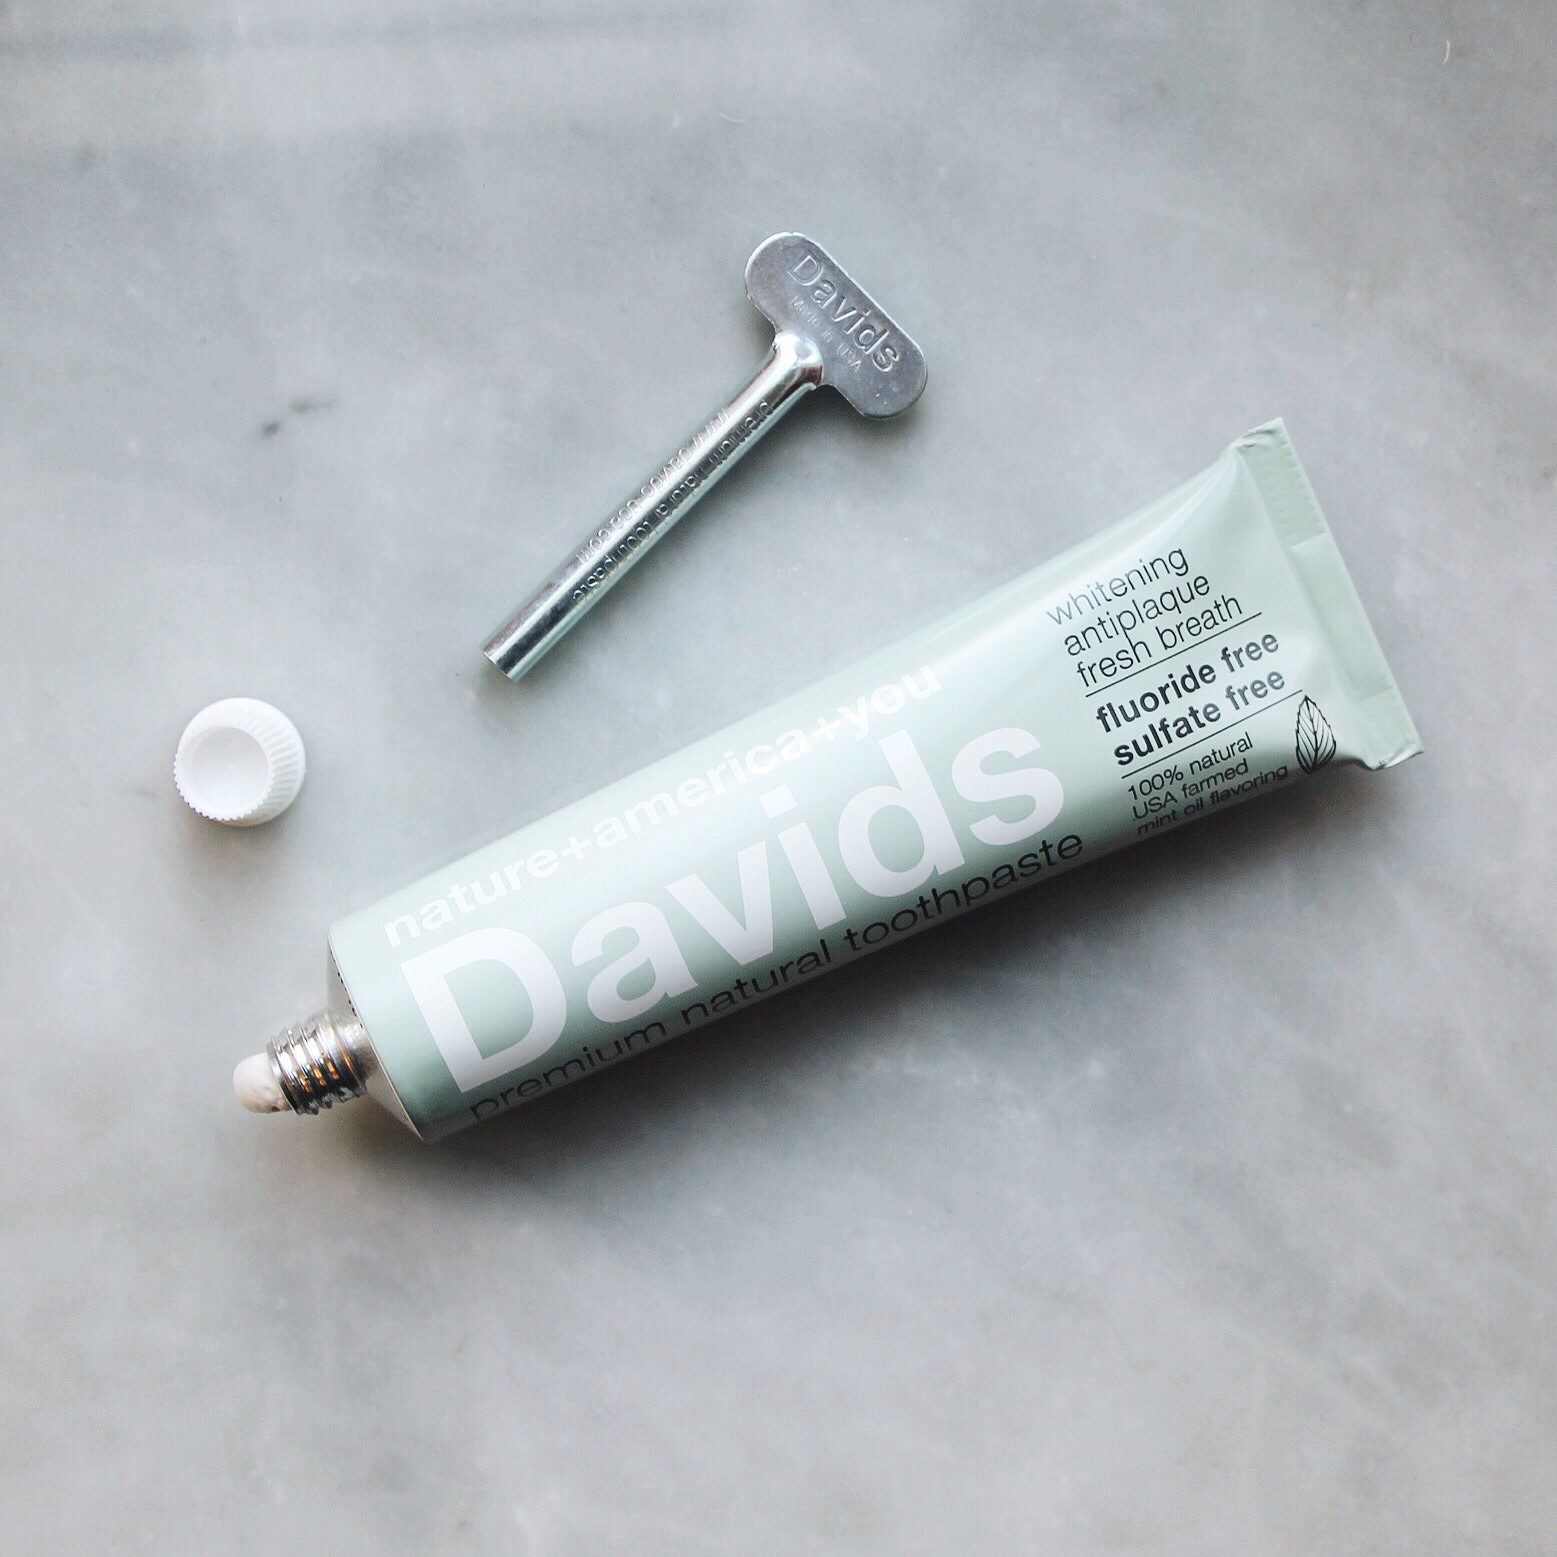 Davids Natural Toothpaste Review + Giveaway